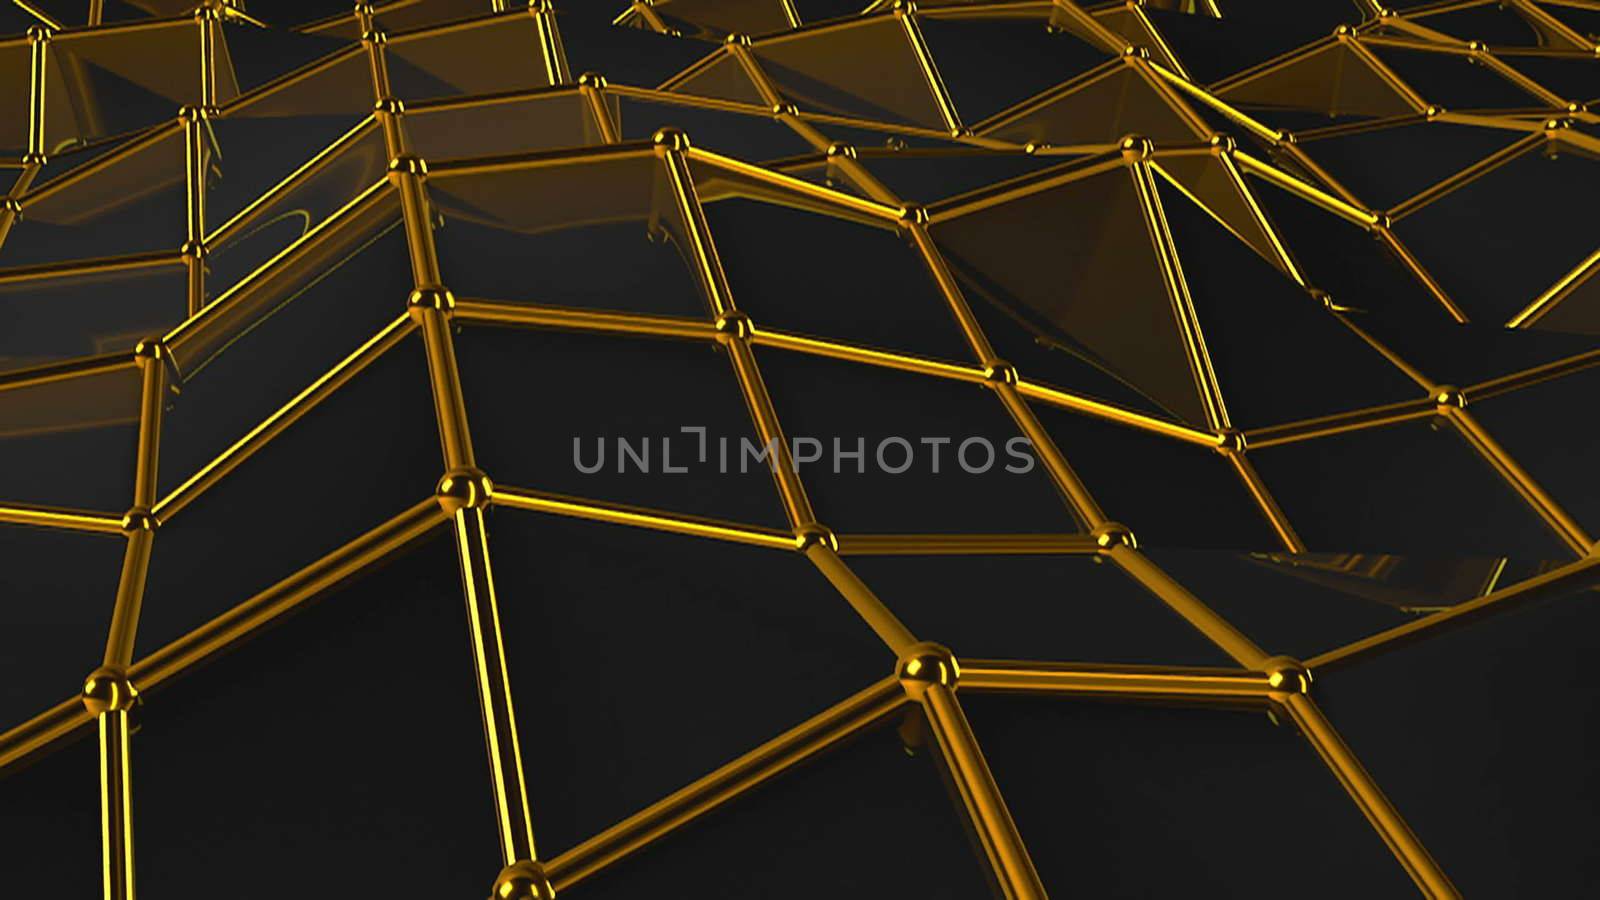 Black Low Poly Abstract Background. Digital illustration. 3d rendering